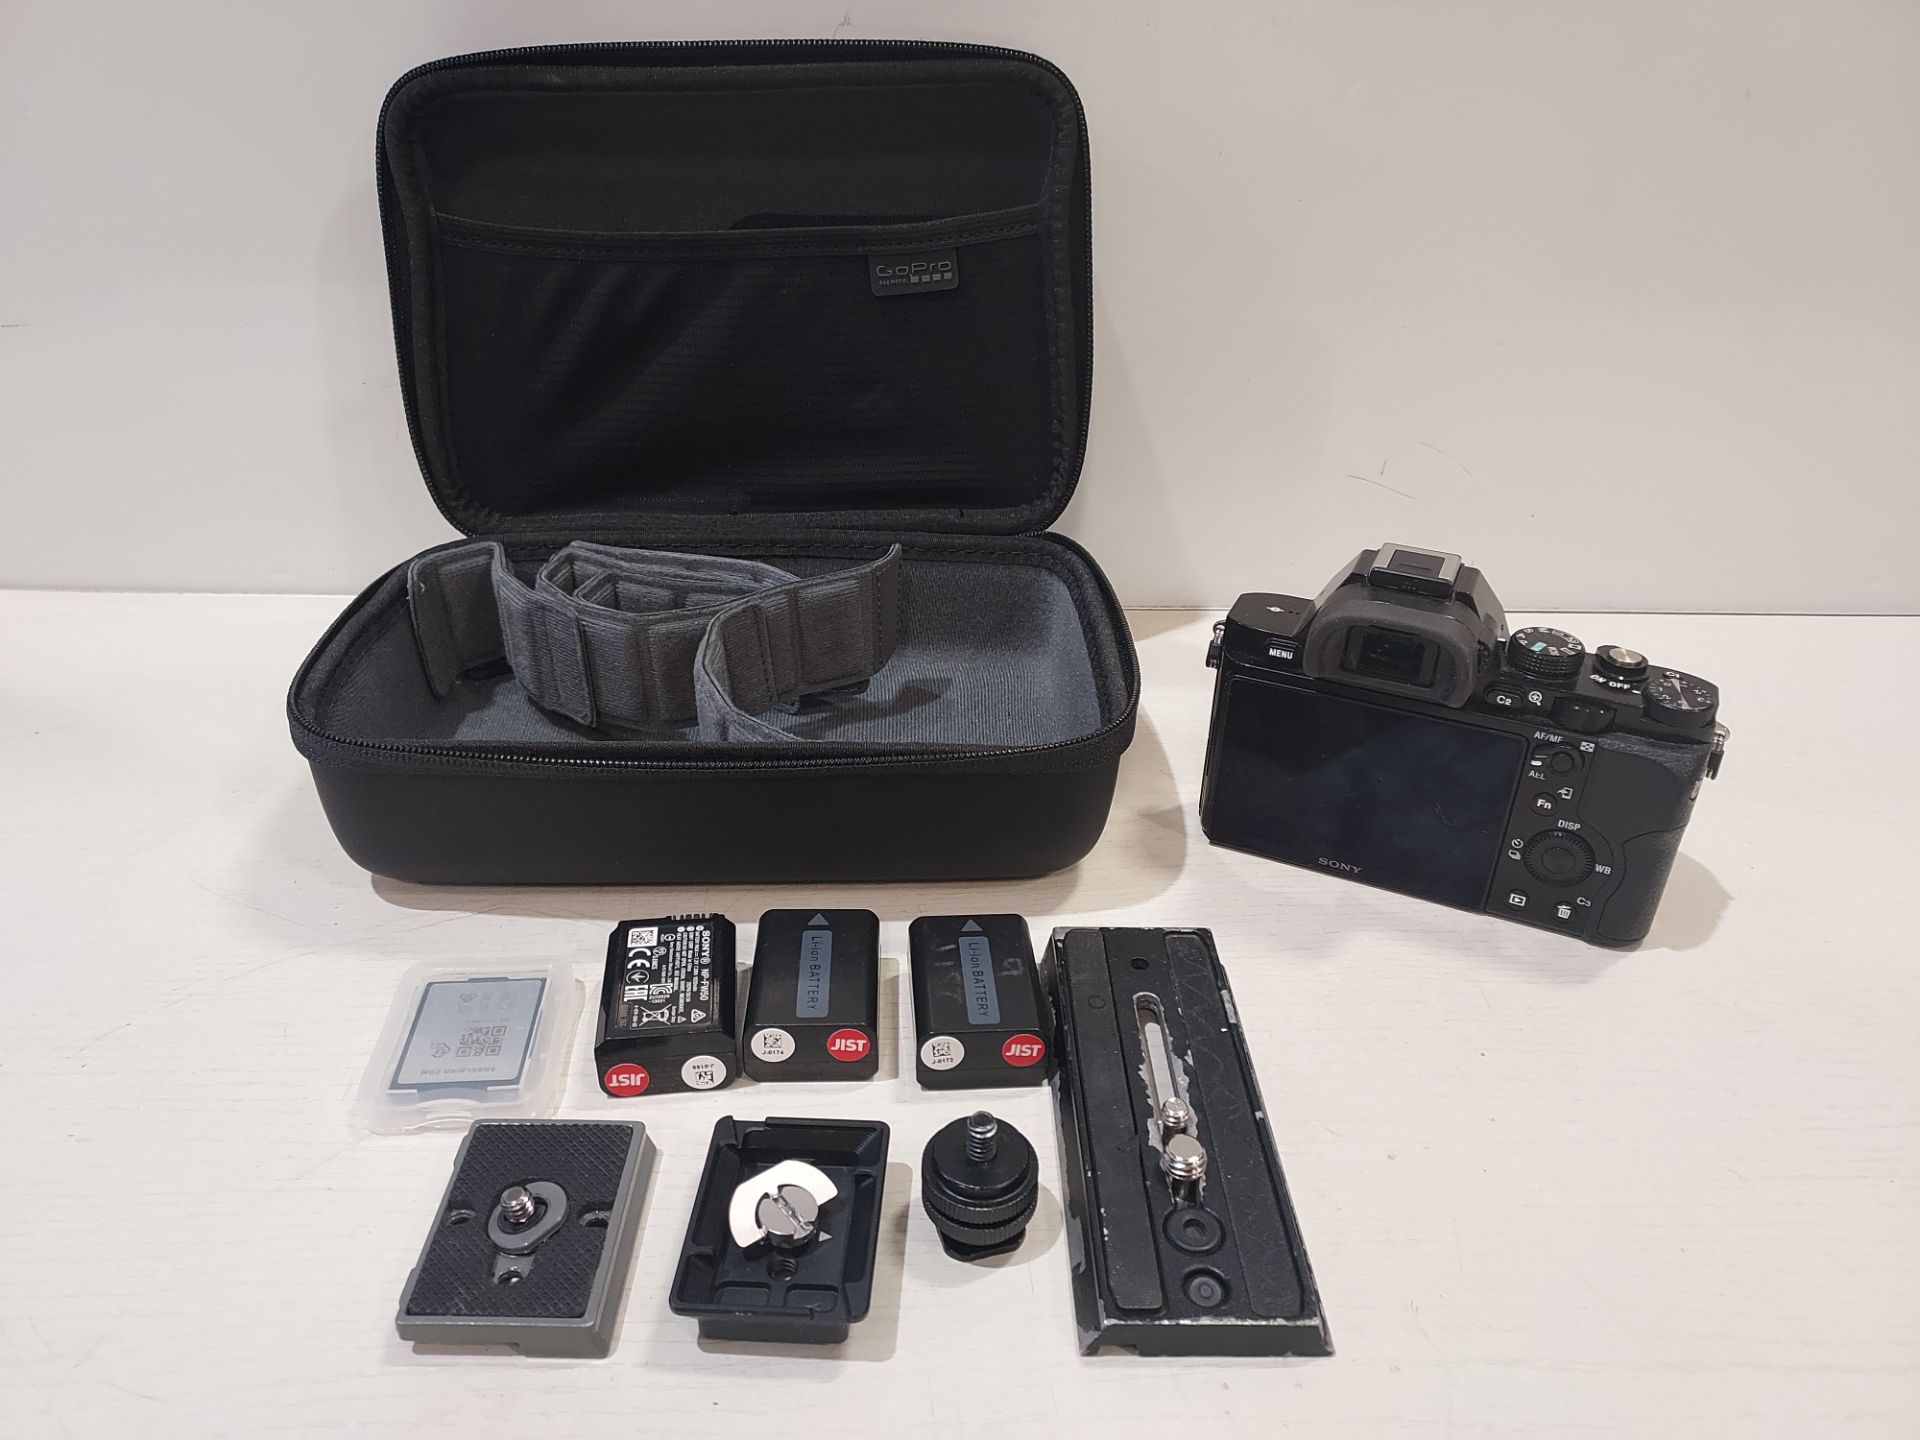 SONY A7 FULL FRAME MIRRORLESS CAMERA BODY WITH SPARE BATTERIES & ORIGINAL BOX - Image 3 of 3